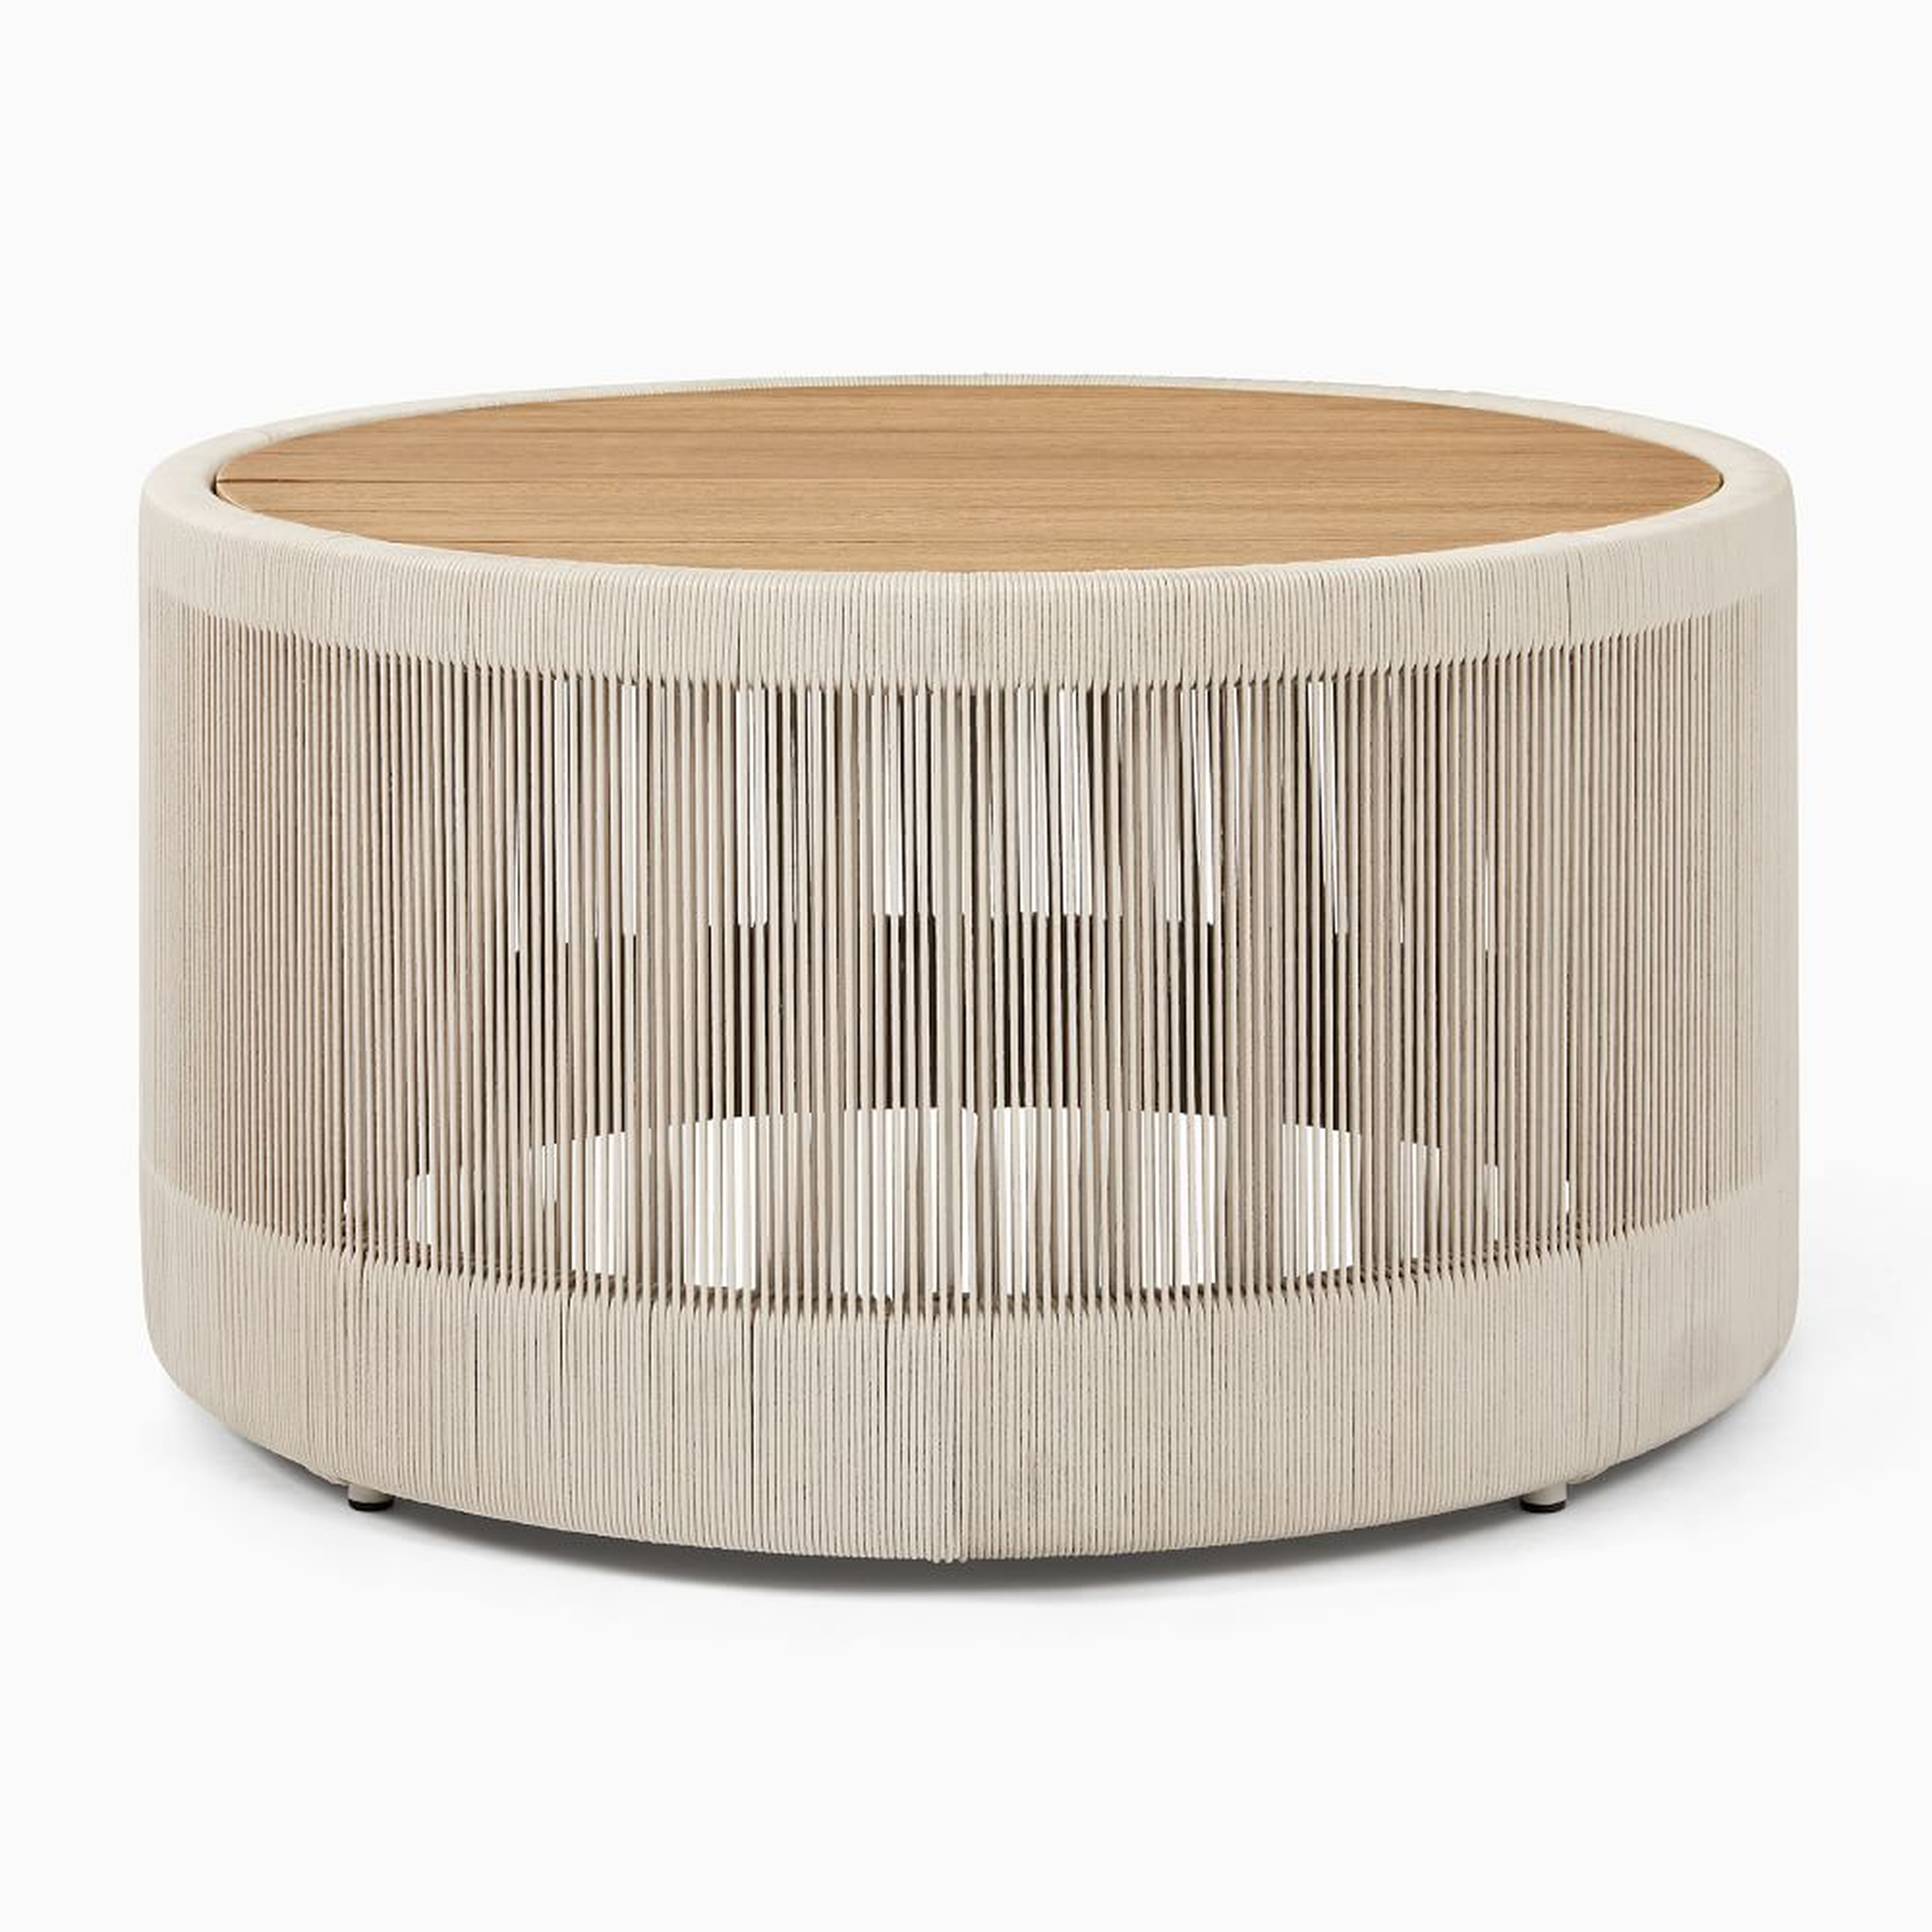 Porto Outdoor 32 in Round Coffee Table, Reef - West Elm